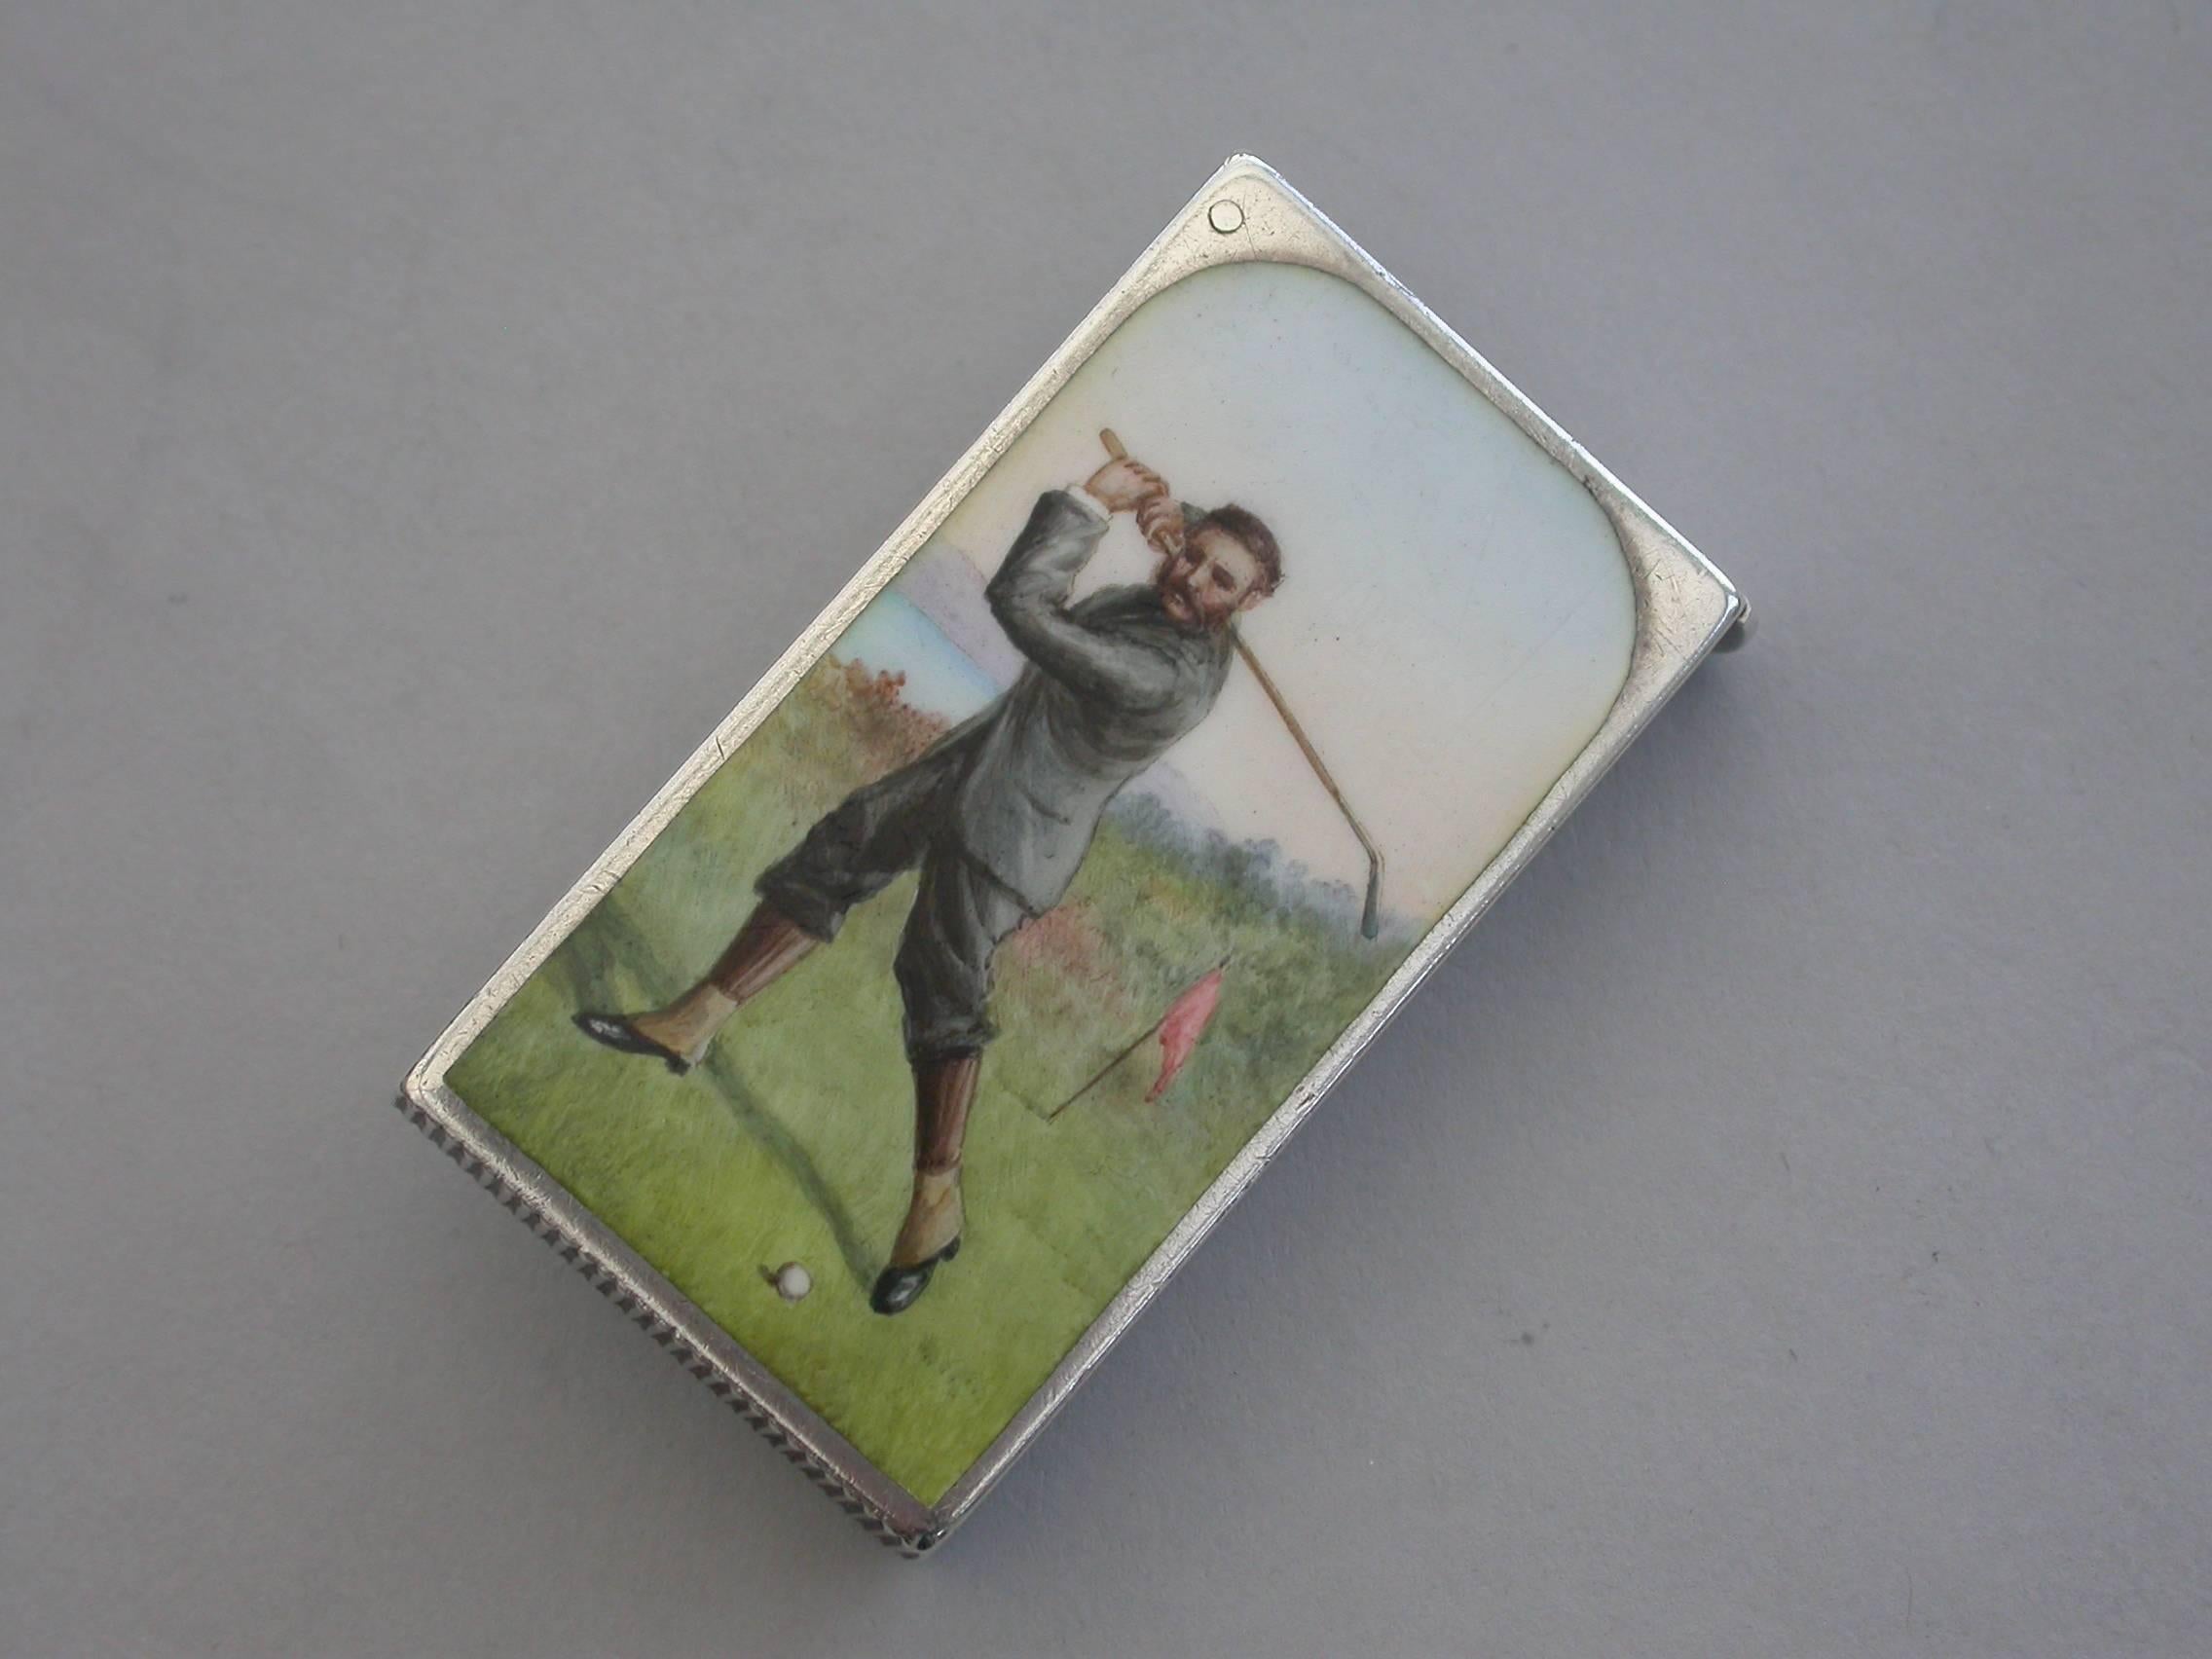 A very fine Victorian silver and enamel Vesta Case of rectangular form with flat hinged lid, the face with inset enamel scene depicting a golfer in vintage clothing and in full swing. The reverse engraved with the contemporary owners name and